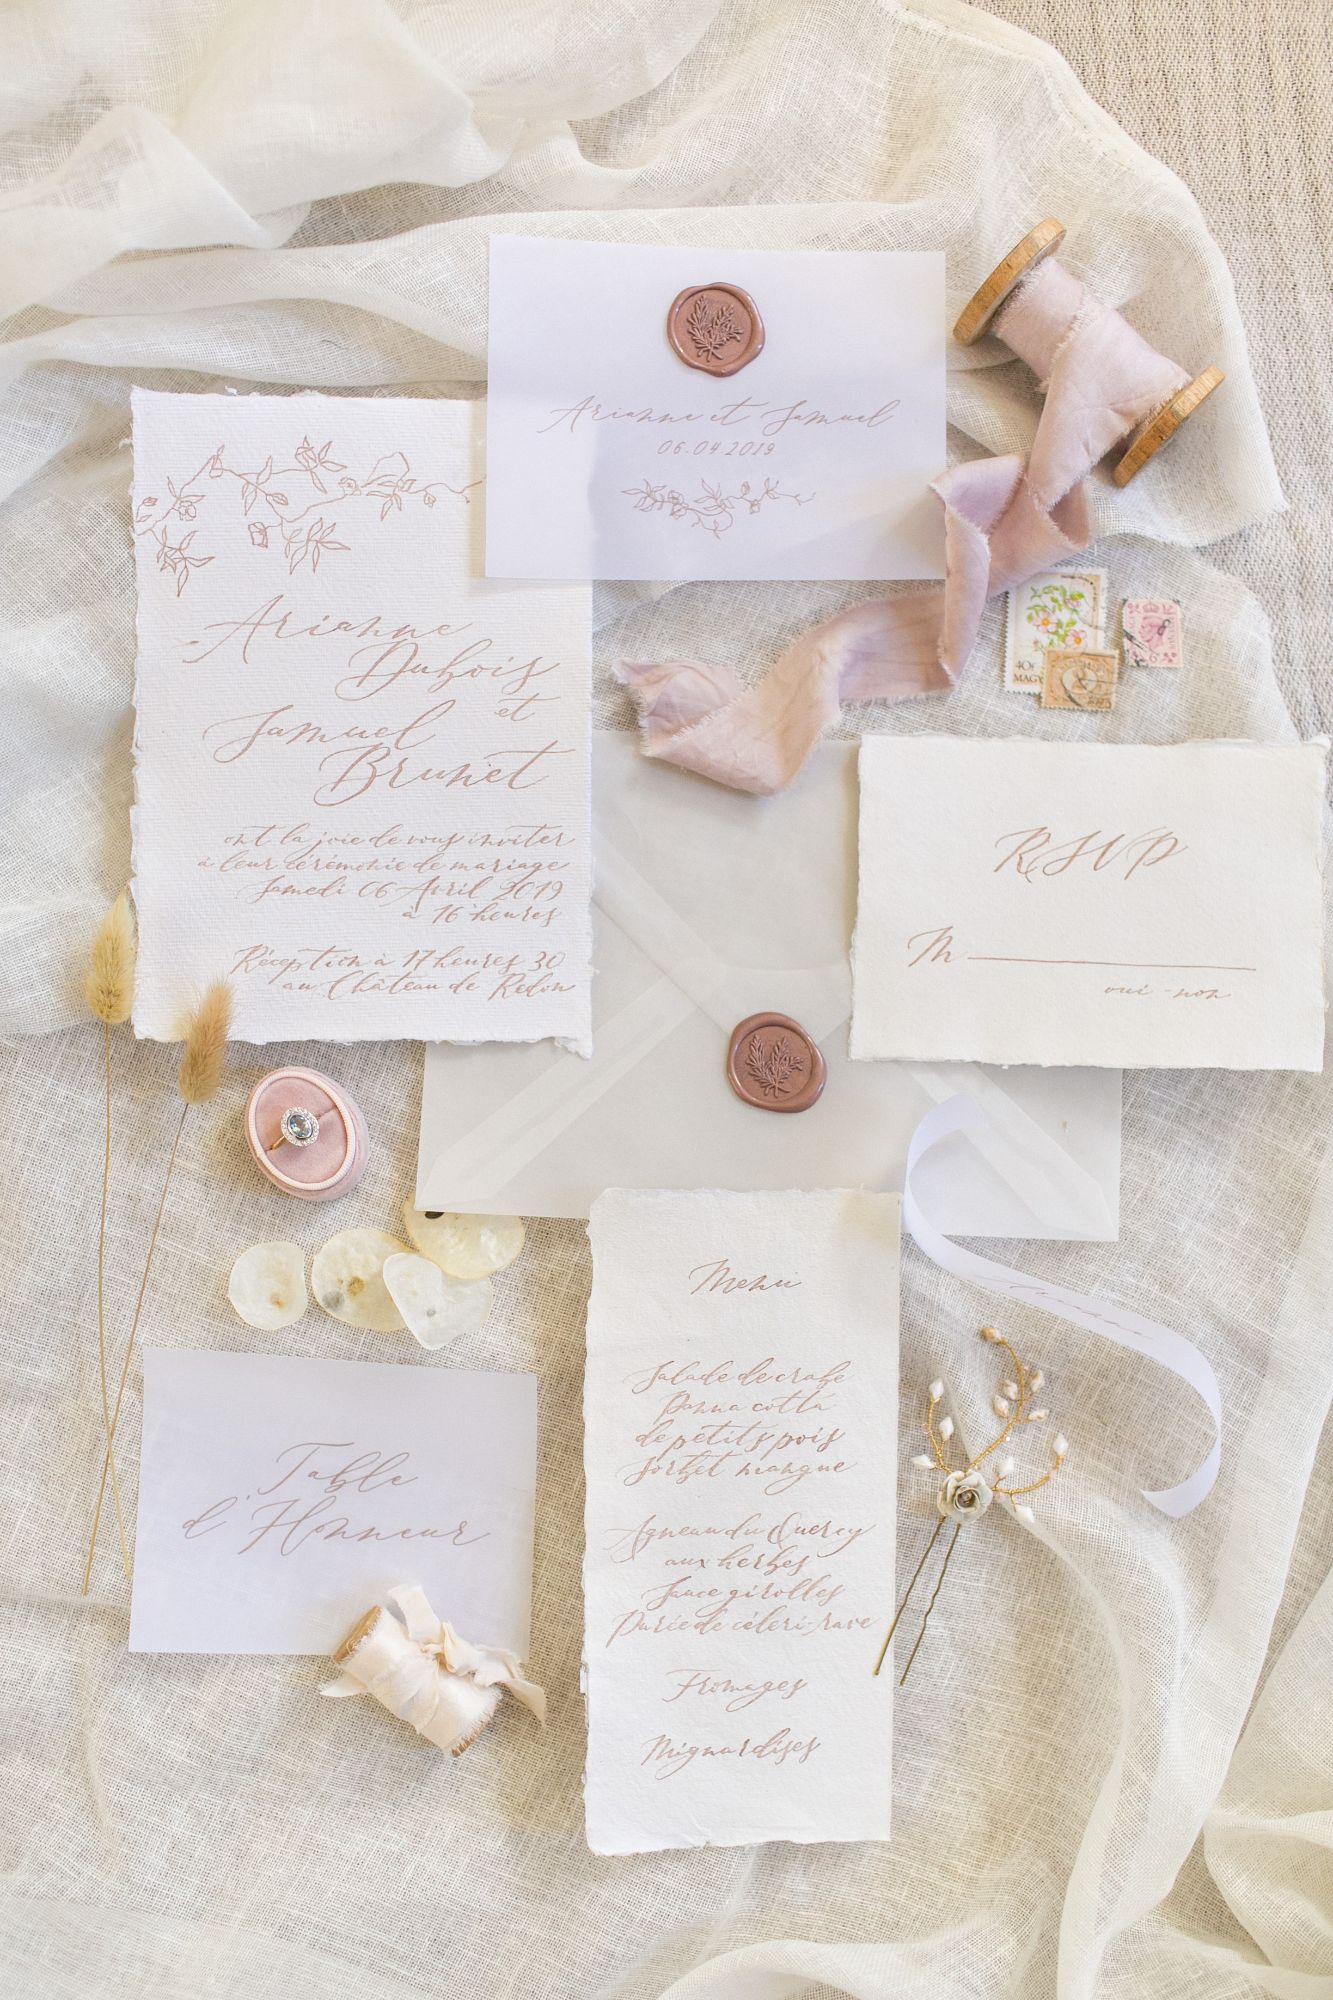 Flat lay image of wedding stationery wedding hair pins and ring captured by Anneli Marinovich